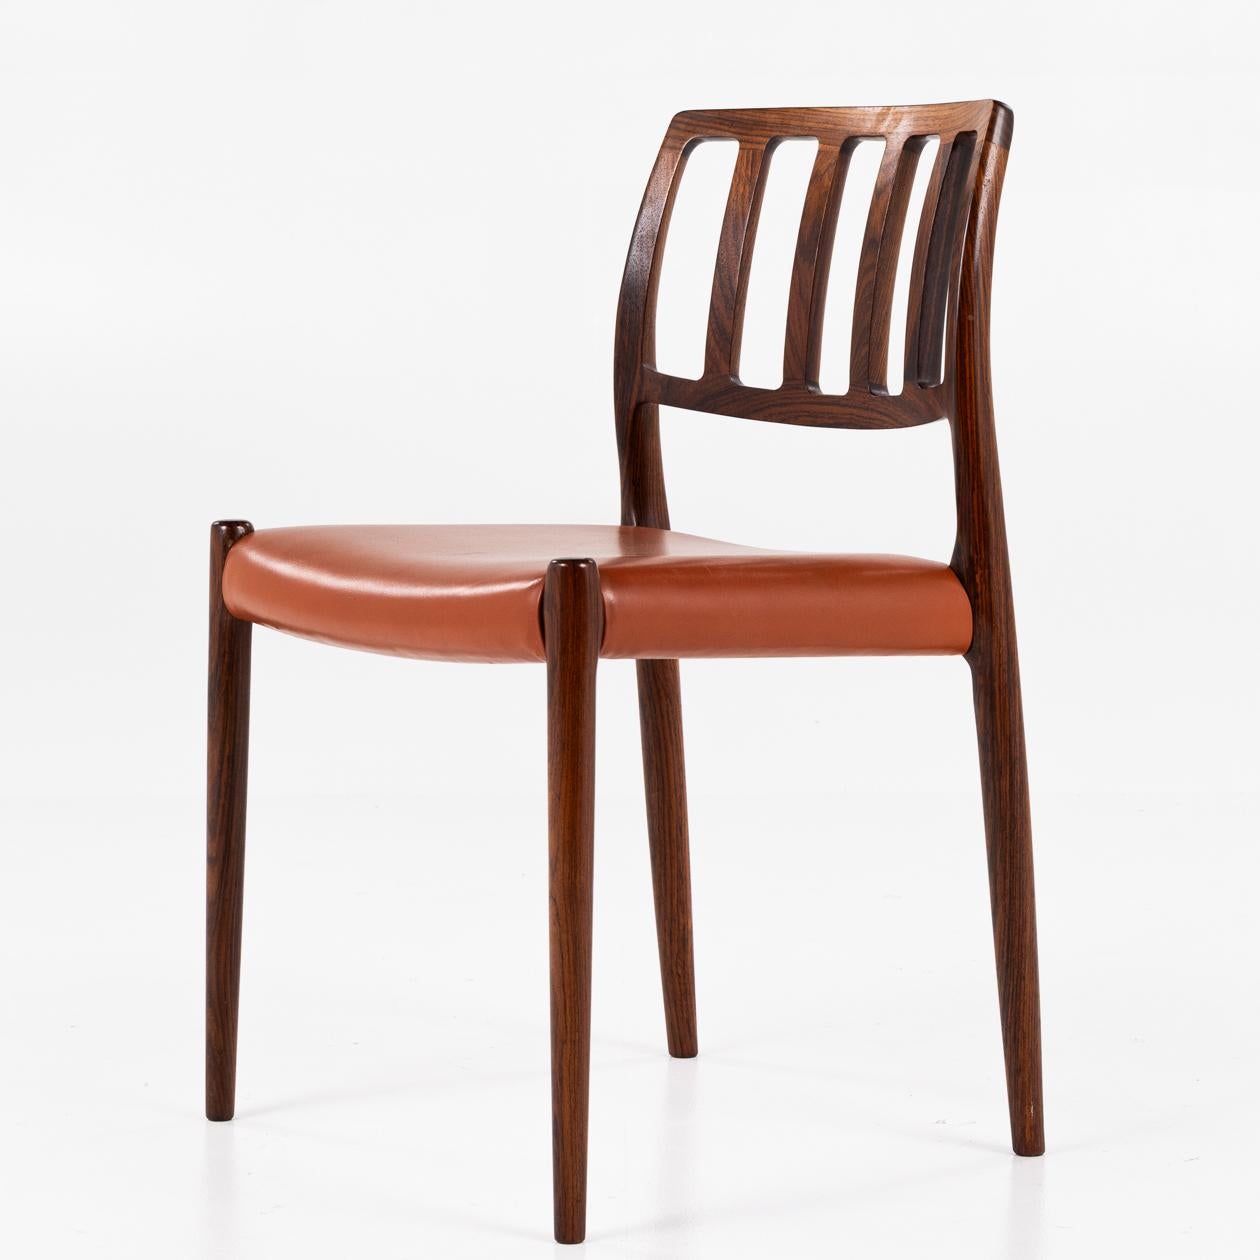 Set of 4 NO 83 - Dining chairs in rosewood and seat in patinated leather. Niels O. Møller / J.L Møller